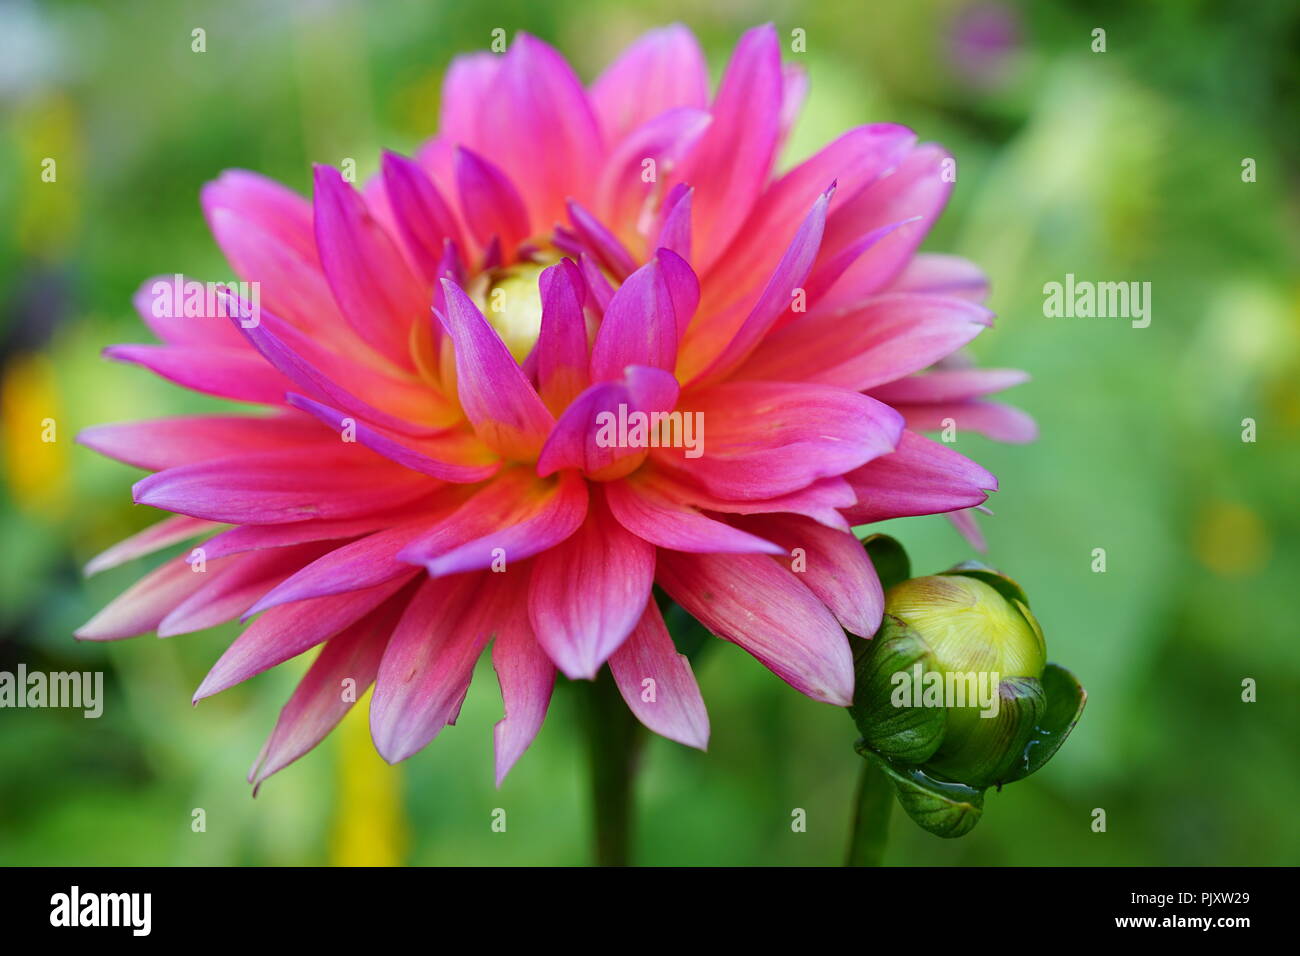 Bright Pink Border Dahlia Flower and Bud Stock Photo